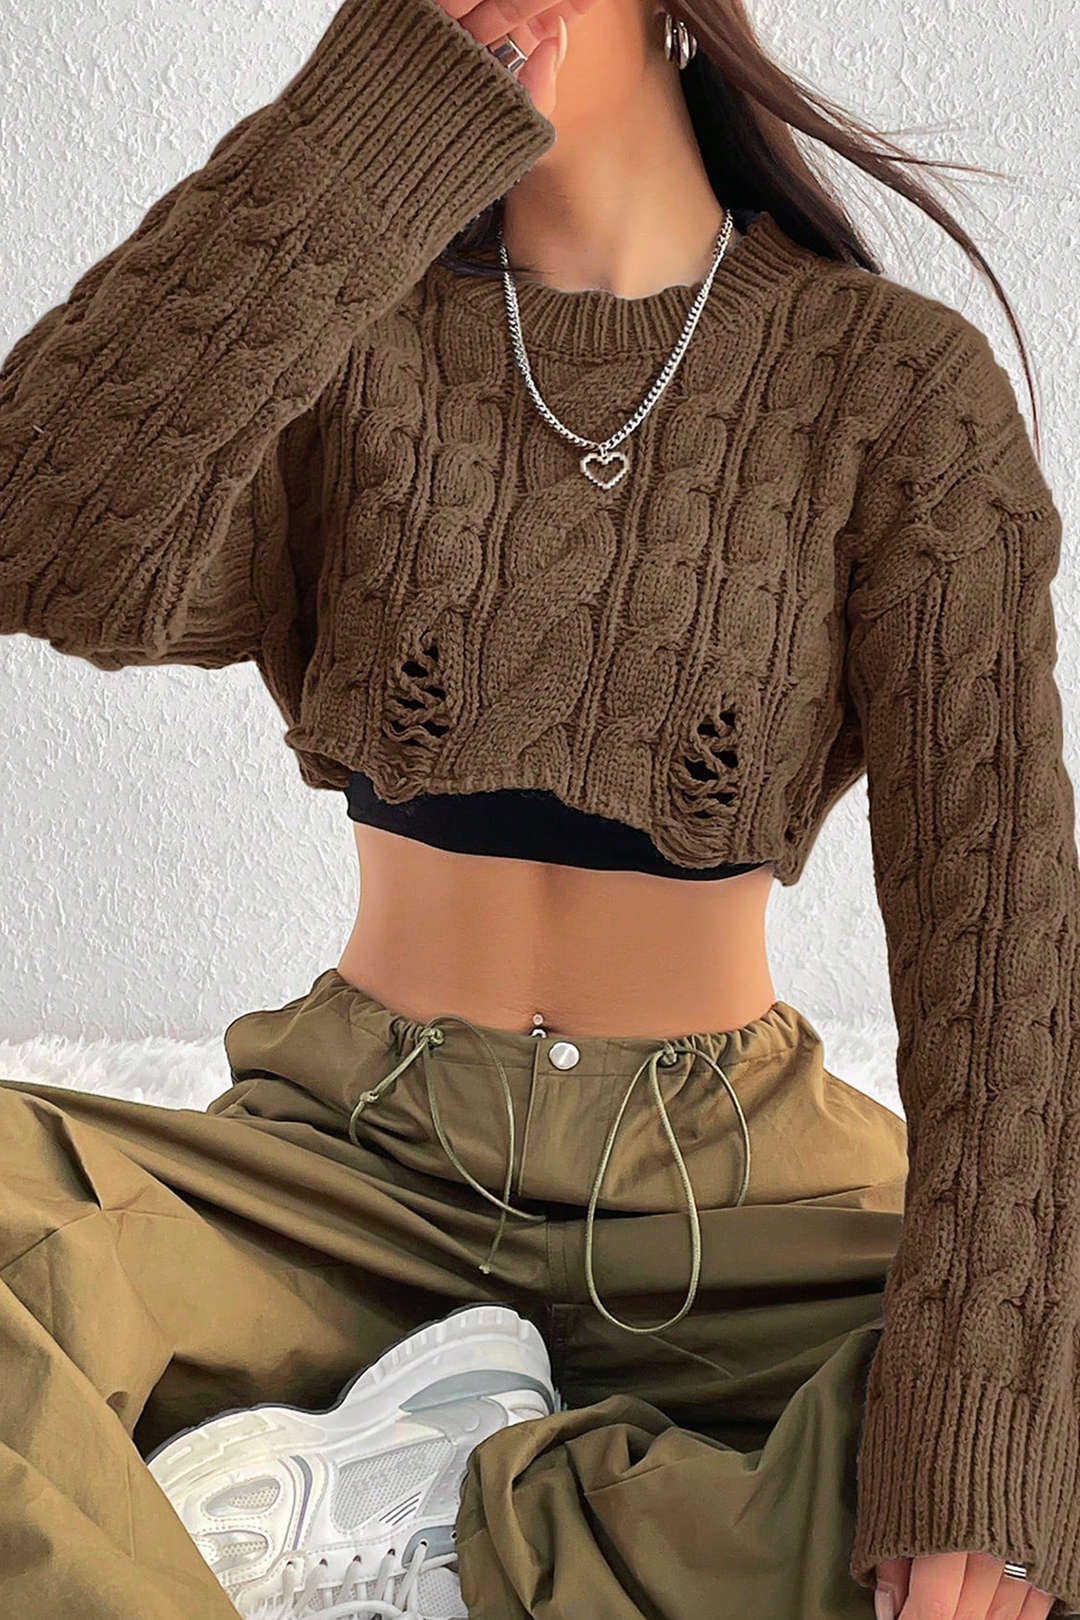 Destroyed Round Neck Cable Knit Top